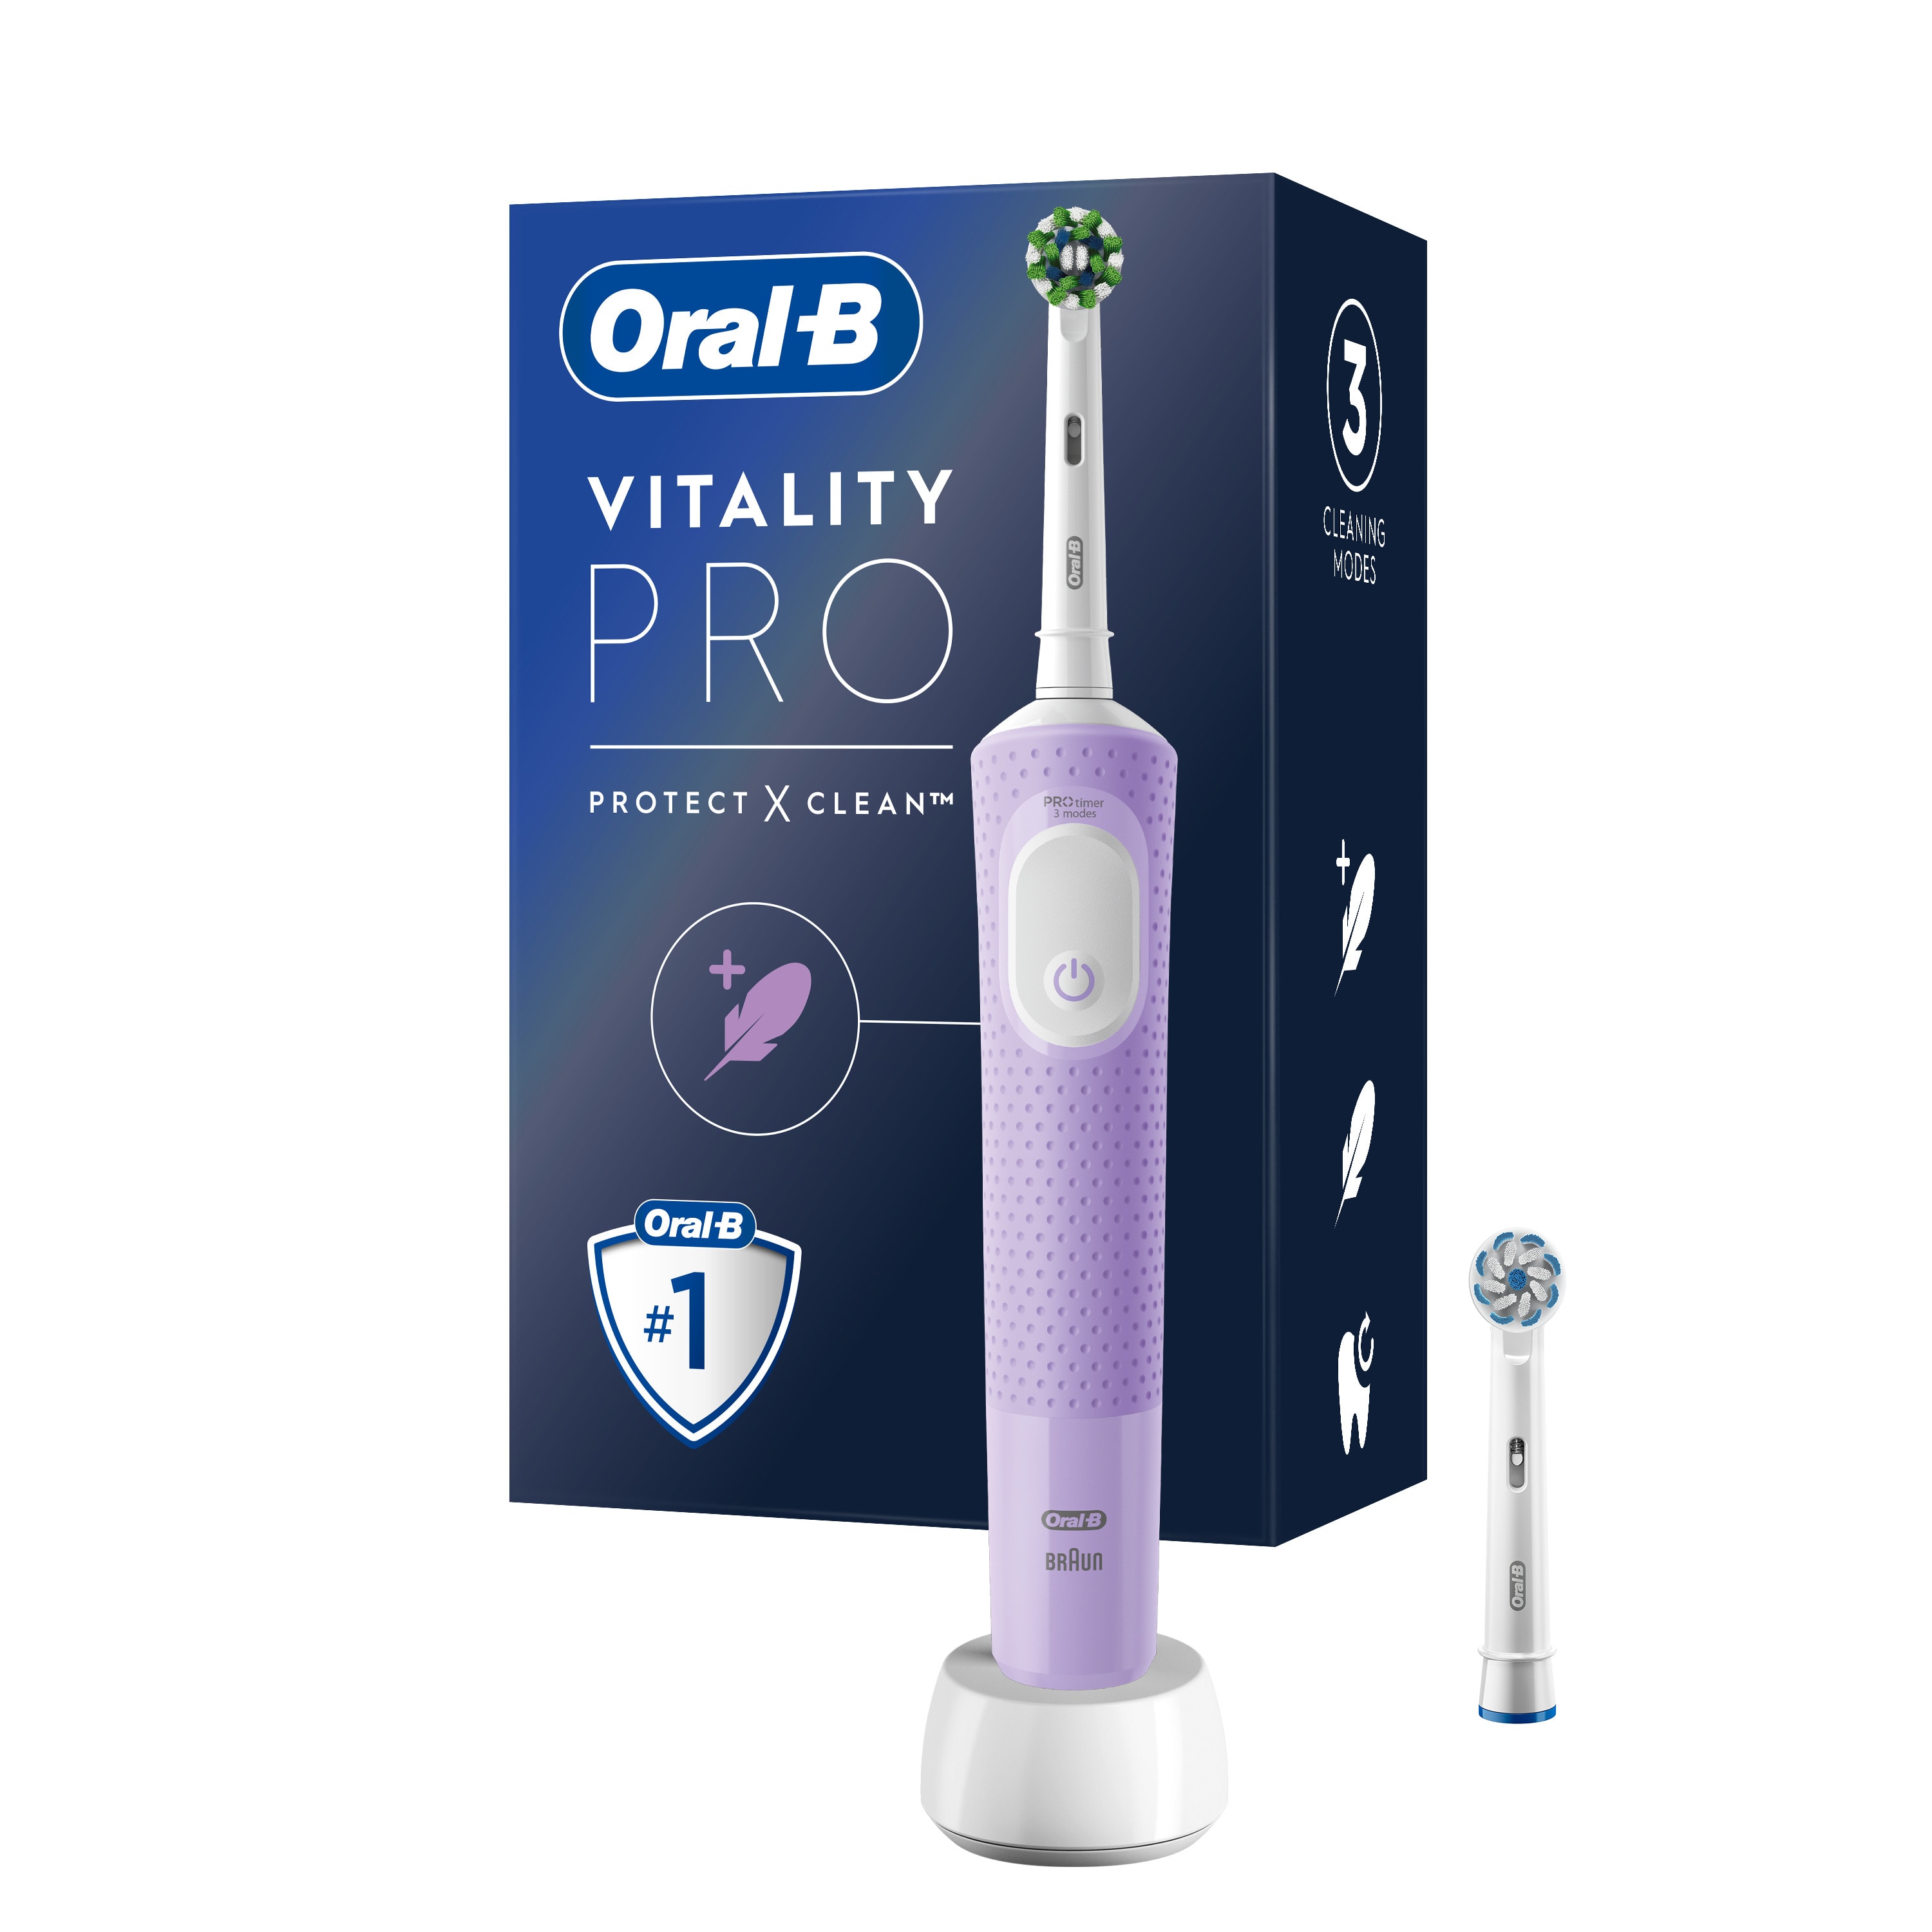 Oral-B Vitality PRO Black & Lilac Electric Toothbrushes